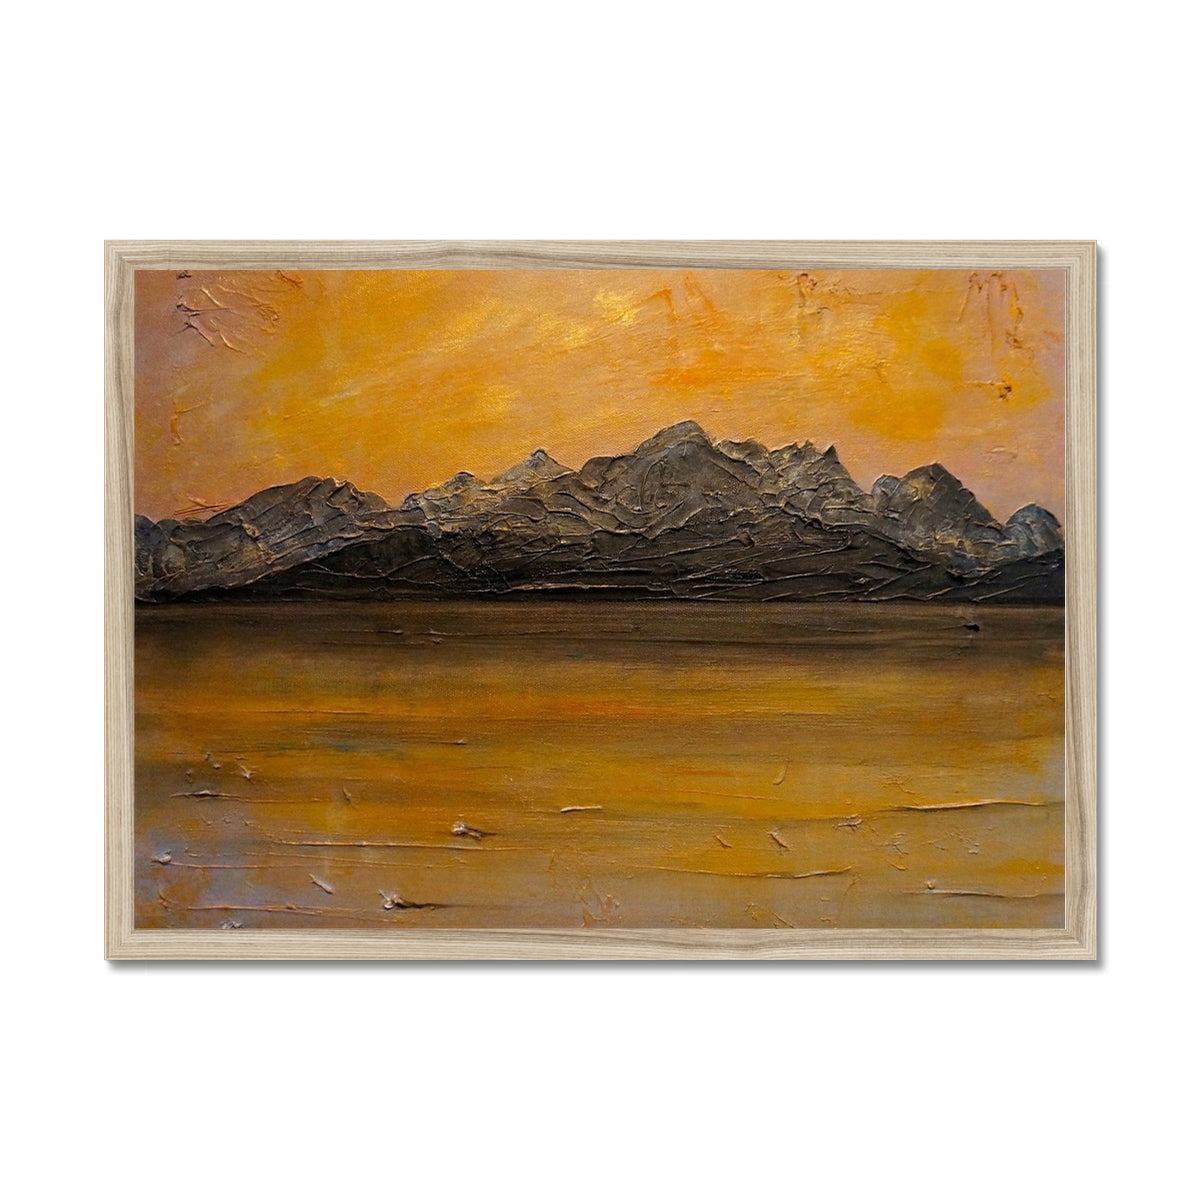 Cuillin Sunset Skye Painting | Framed Prints From Scotland-Framed Prints-Skye Art Gallery-A2 Landscape-Natural Frame-Paintings, Prints, Homeware, Art Gifts From Scotland By Scottish Artist Kevin Hunter